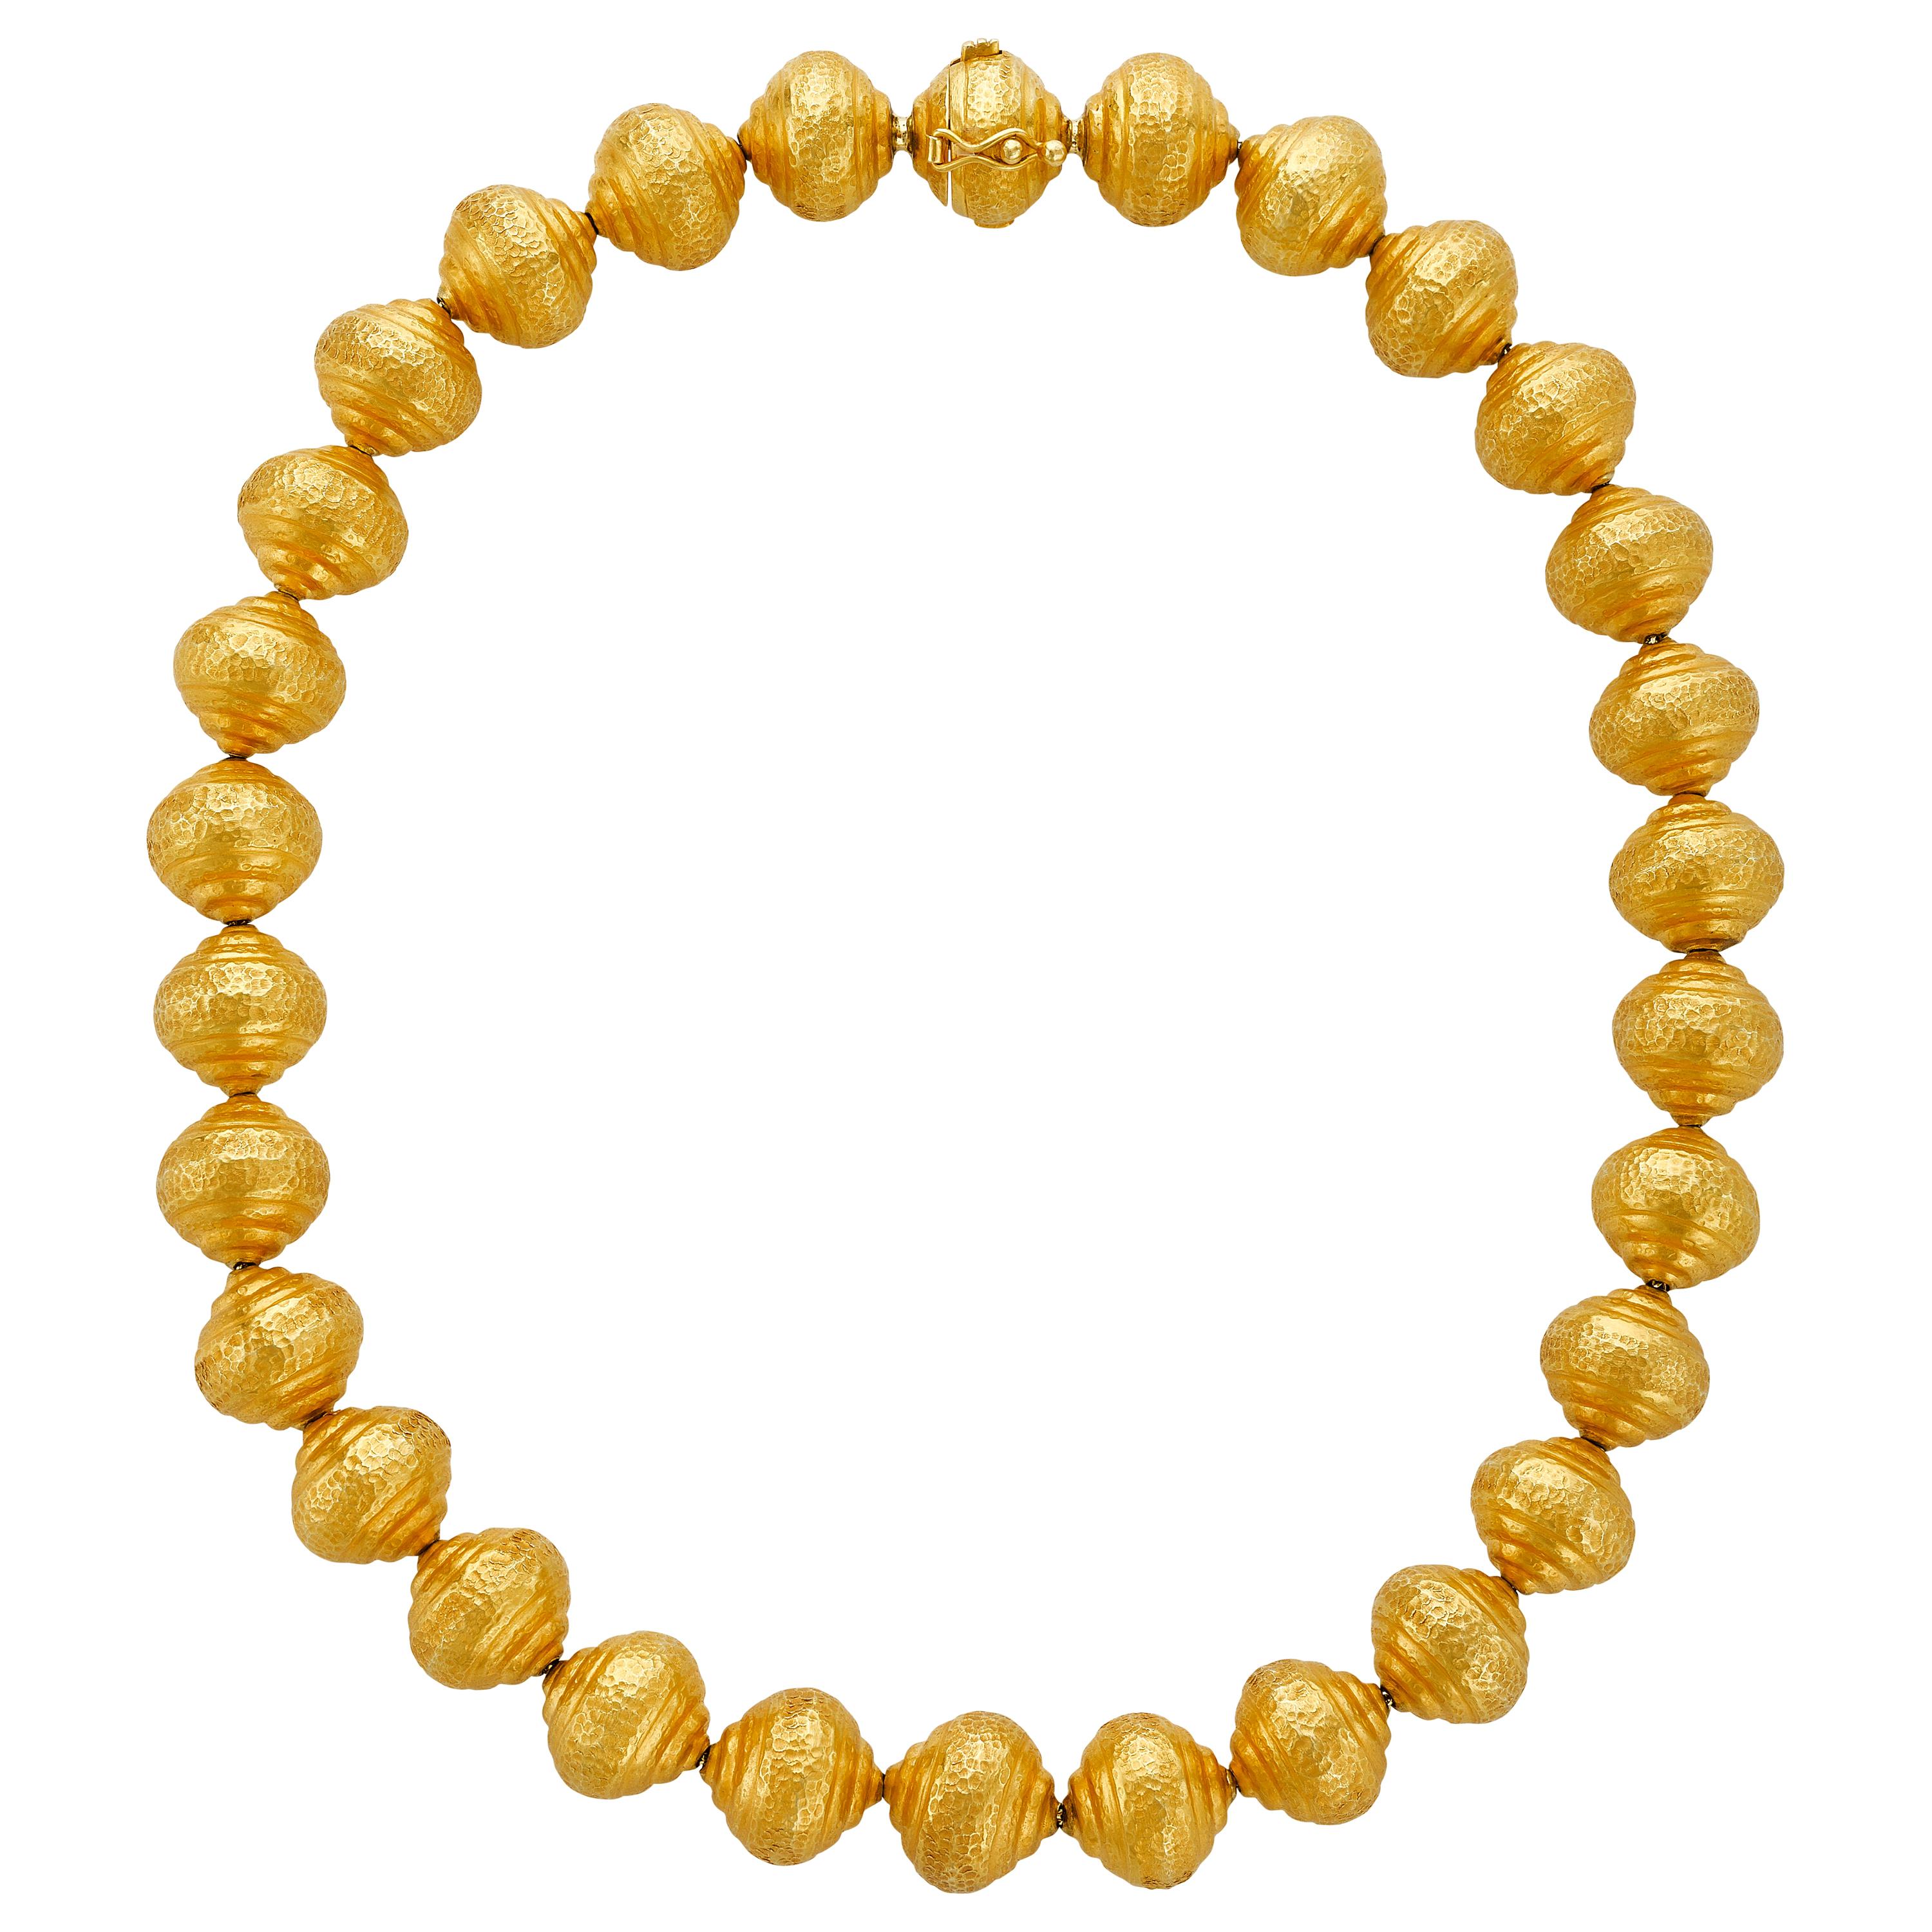 This unique necklace has charming 18k yellow gold hammered balls that are strung together and tapered on a 16” chain. The necklace has a hidden clasp and safety and sits perfectly on any woman’s neck. 